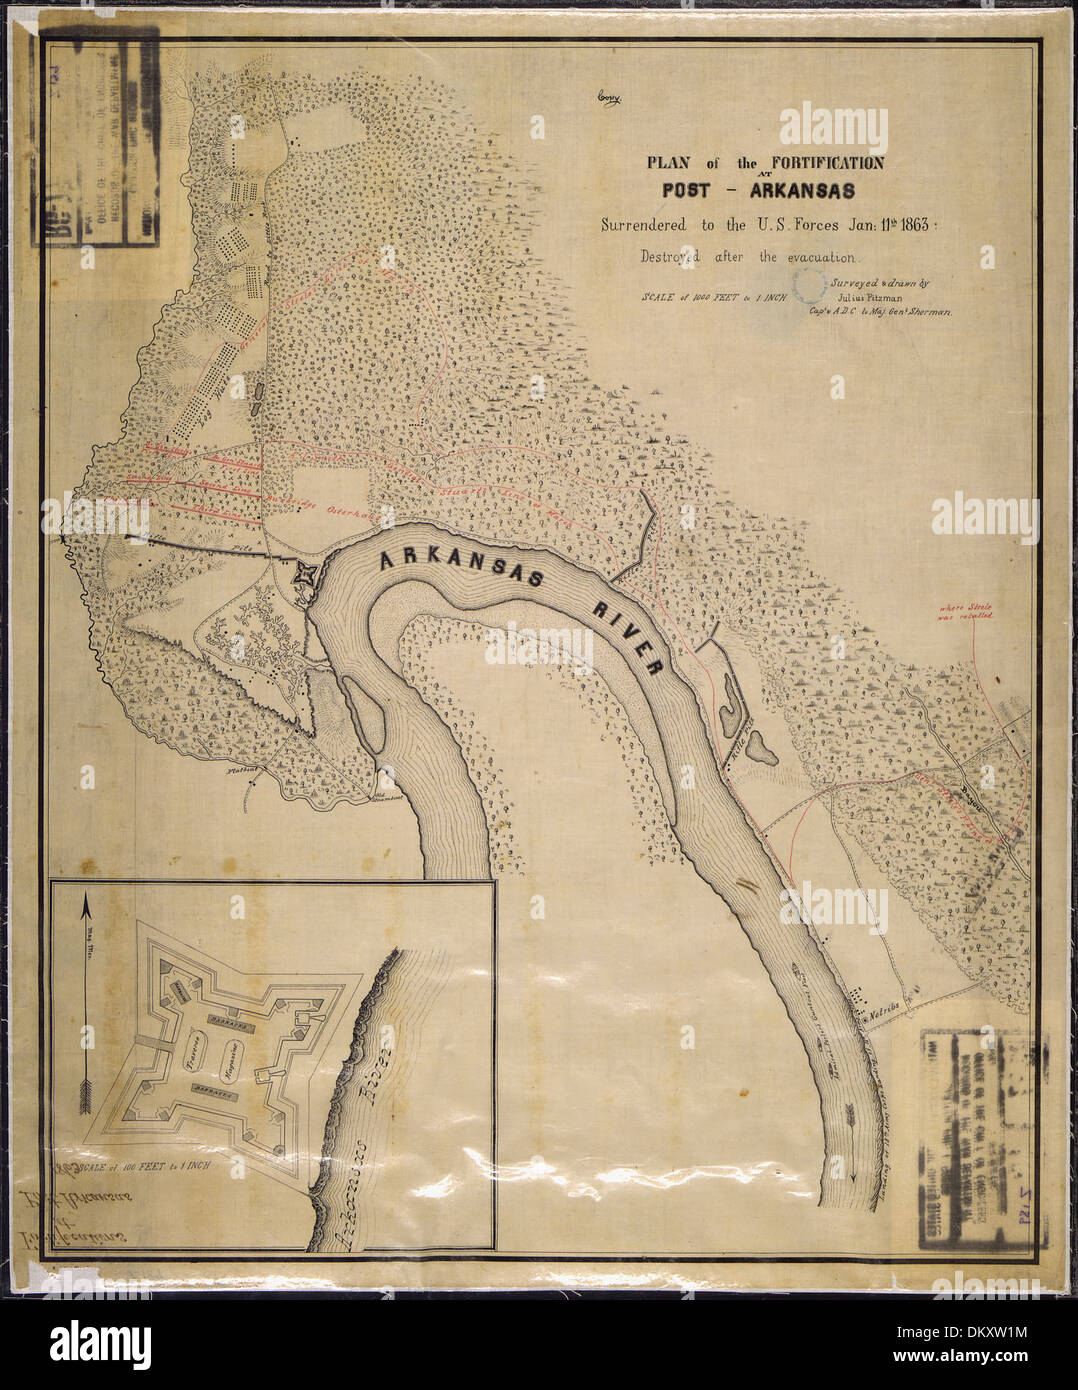 (Map and inset ground) Plan of the Fortification (Fort Hindman) at Post, Arkansas, Surrendered to the U.S. Forces... 305724 Stock Photo